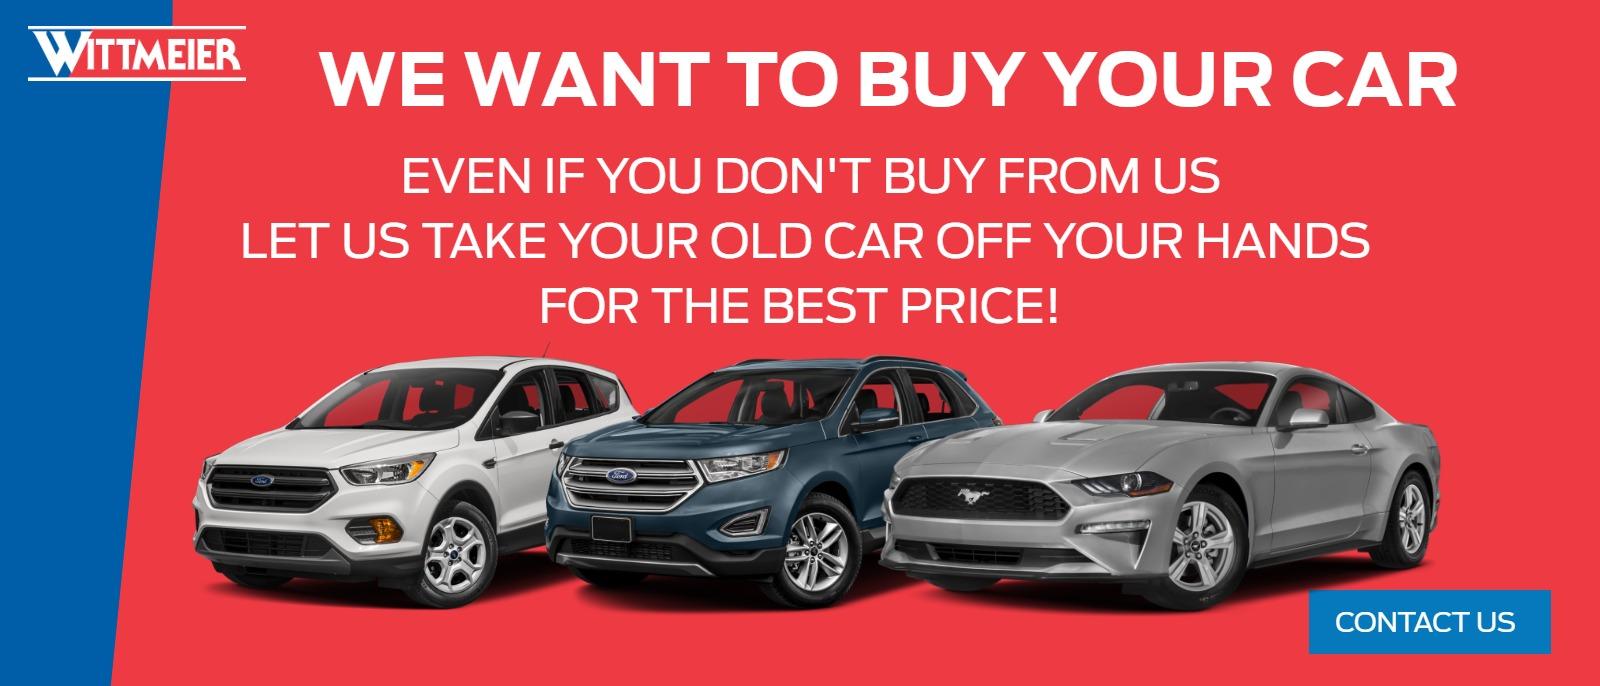 Your Trusted Car Dealerships, Car Shop, Cars for Sale